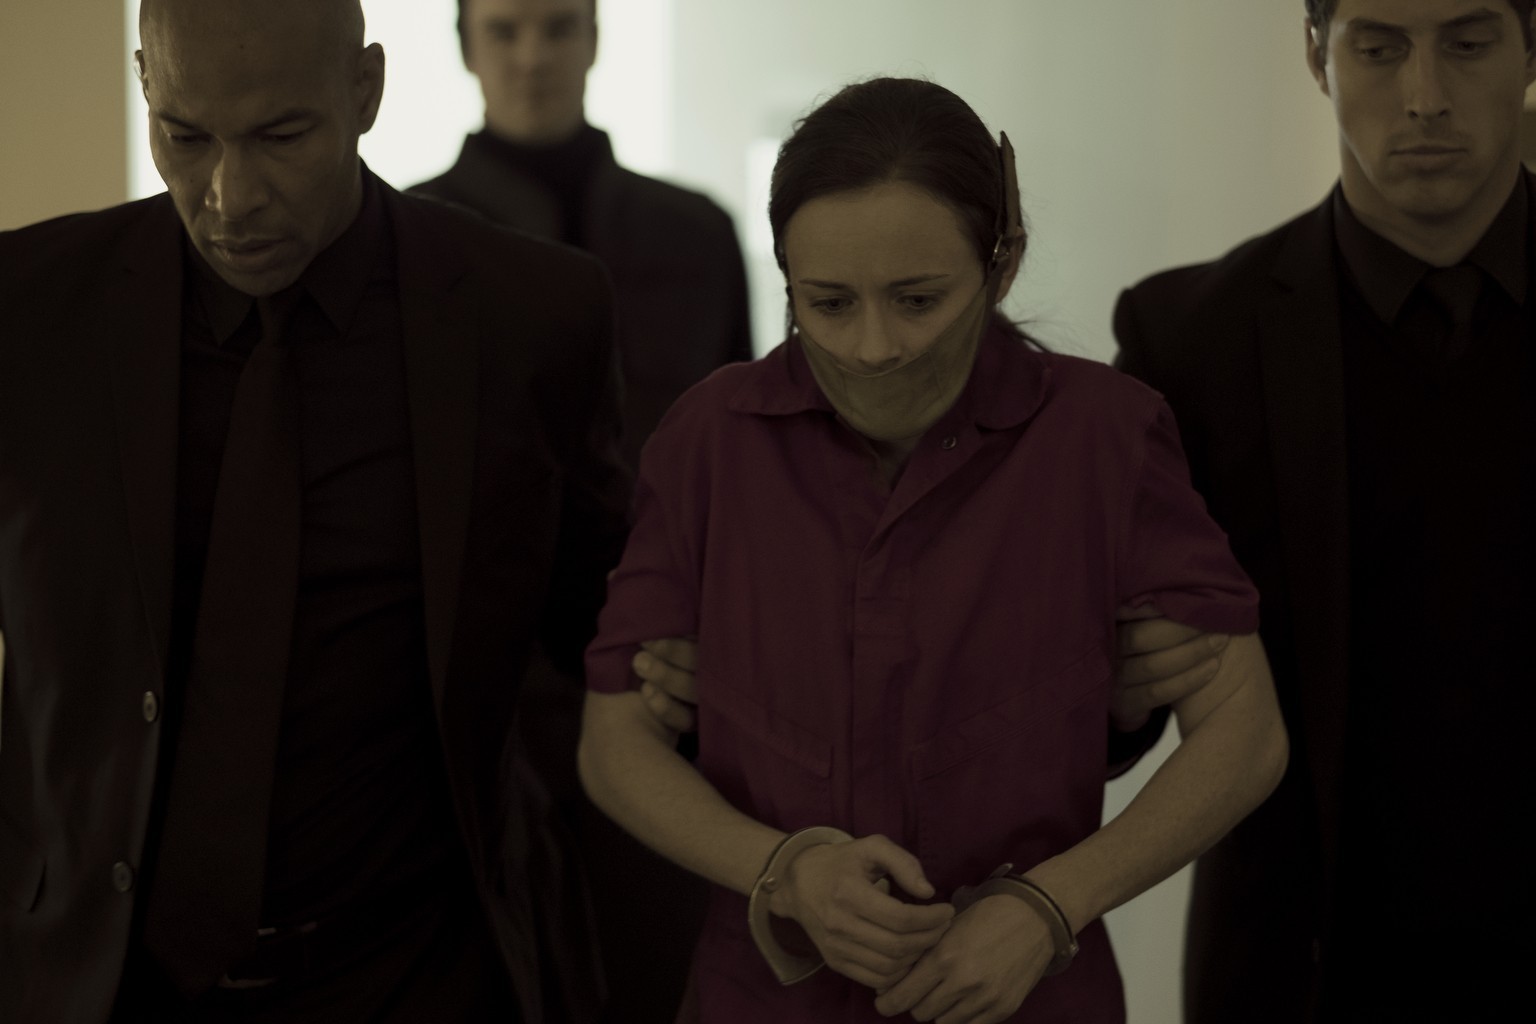 Alexis Bledel in The Handmaid's Tale. - GEORGE KRAYCHYK/COURTESY OF HULU